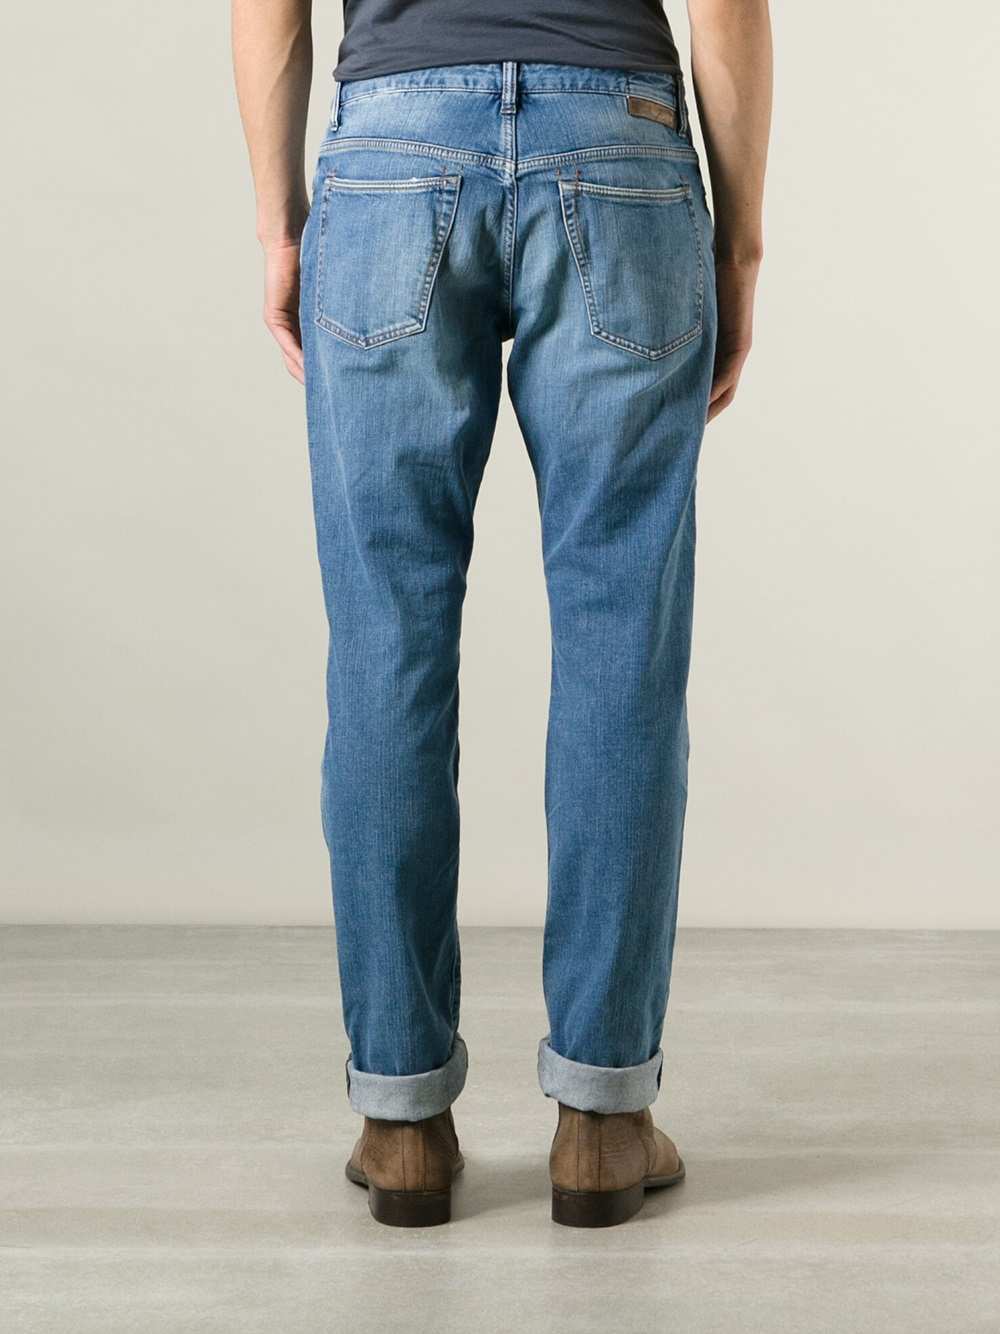 Lyst - Incotex Ray Straight Leg Jeans in Blue for Men